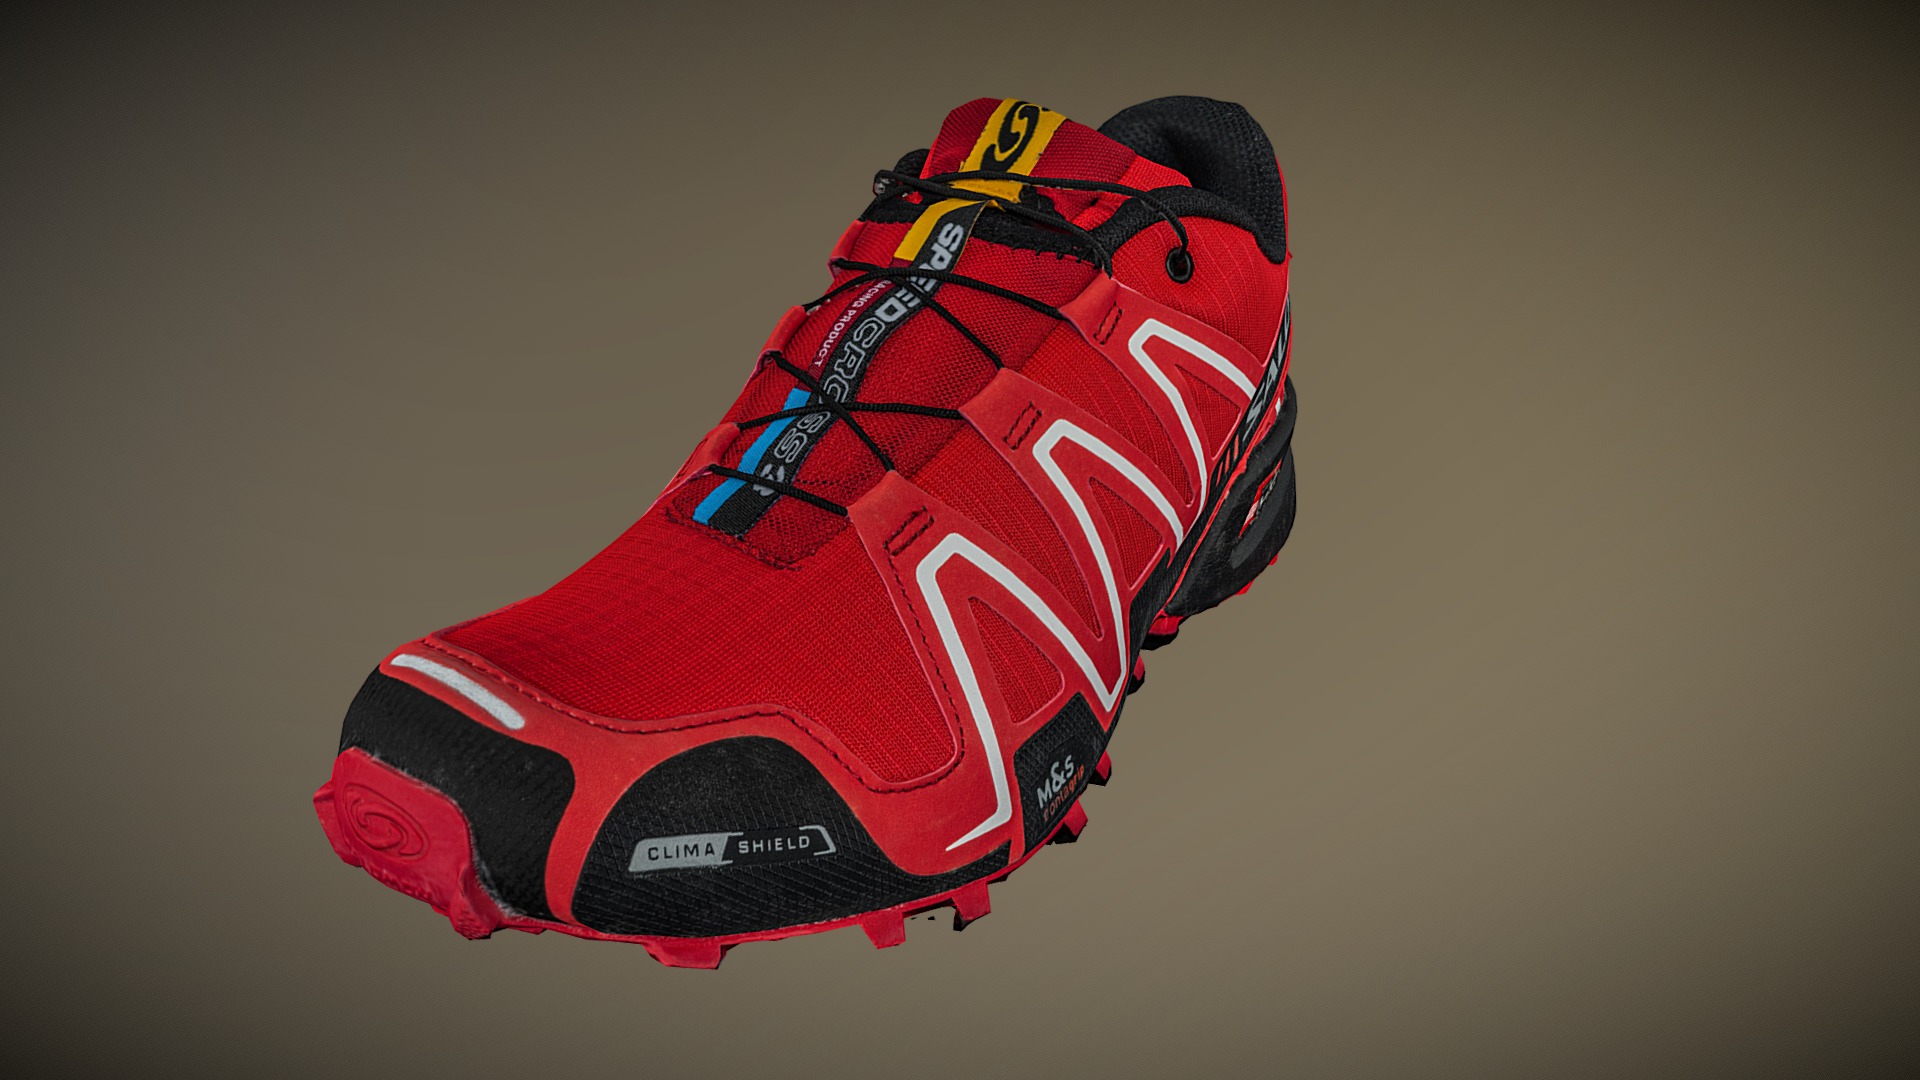 3D model Salomon SpeedCross low poly photogrammetry scan - This is a 3D model of the Salomon SpeedCross low poly photogrammetry scan. The 3D model is about a red and black shoe.